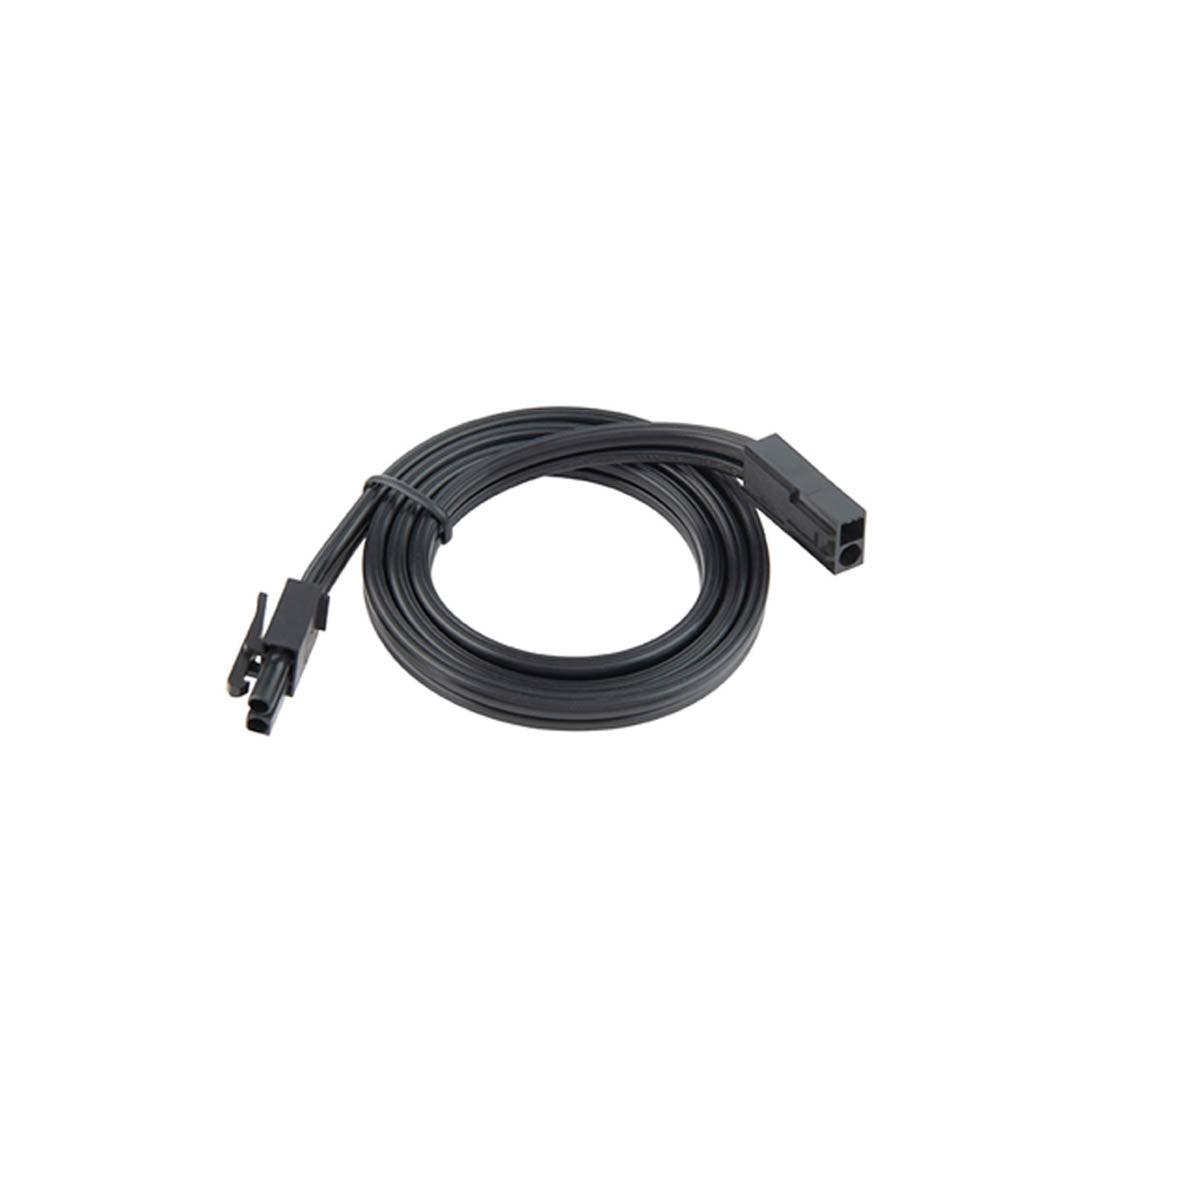 12in. Interconnect Cable for 3-CCT Puck Light, Black